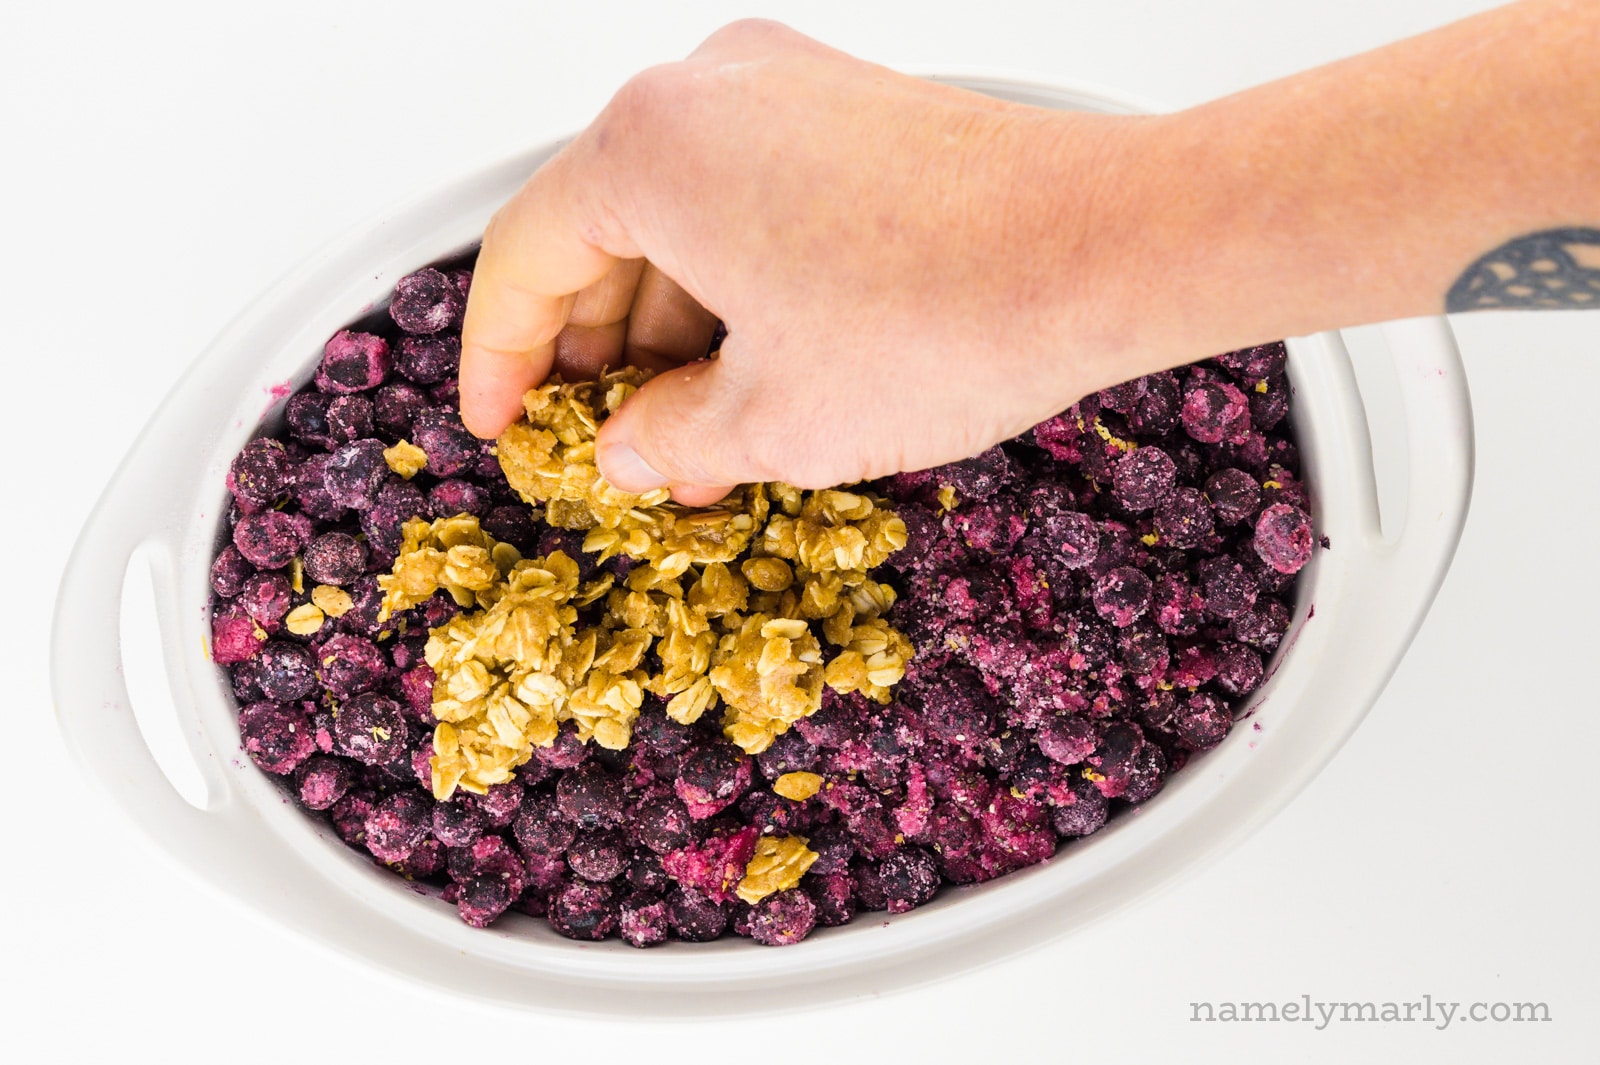 A hand holds crumble mixture and is spreading it across blueberries in a casserole dish.